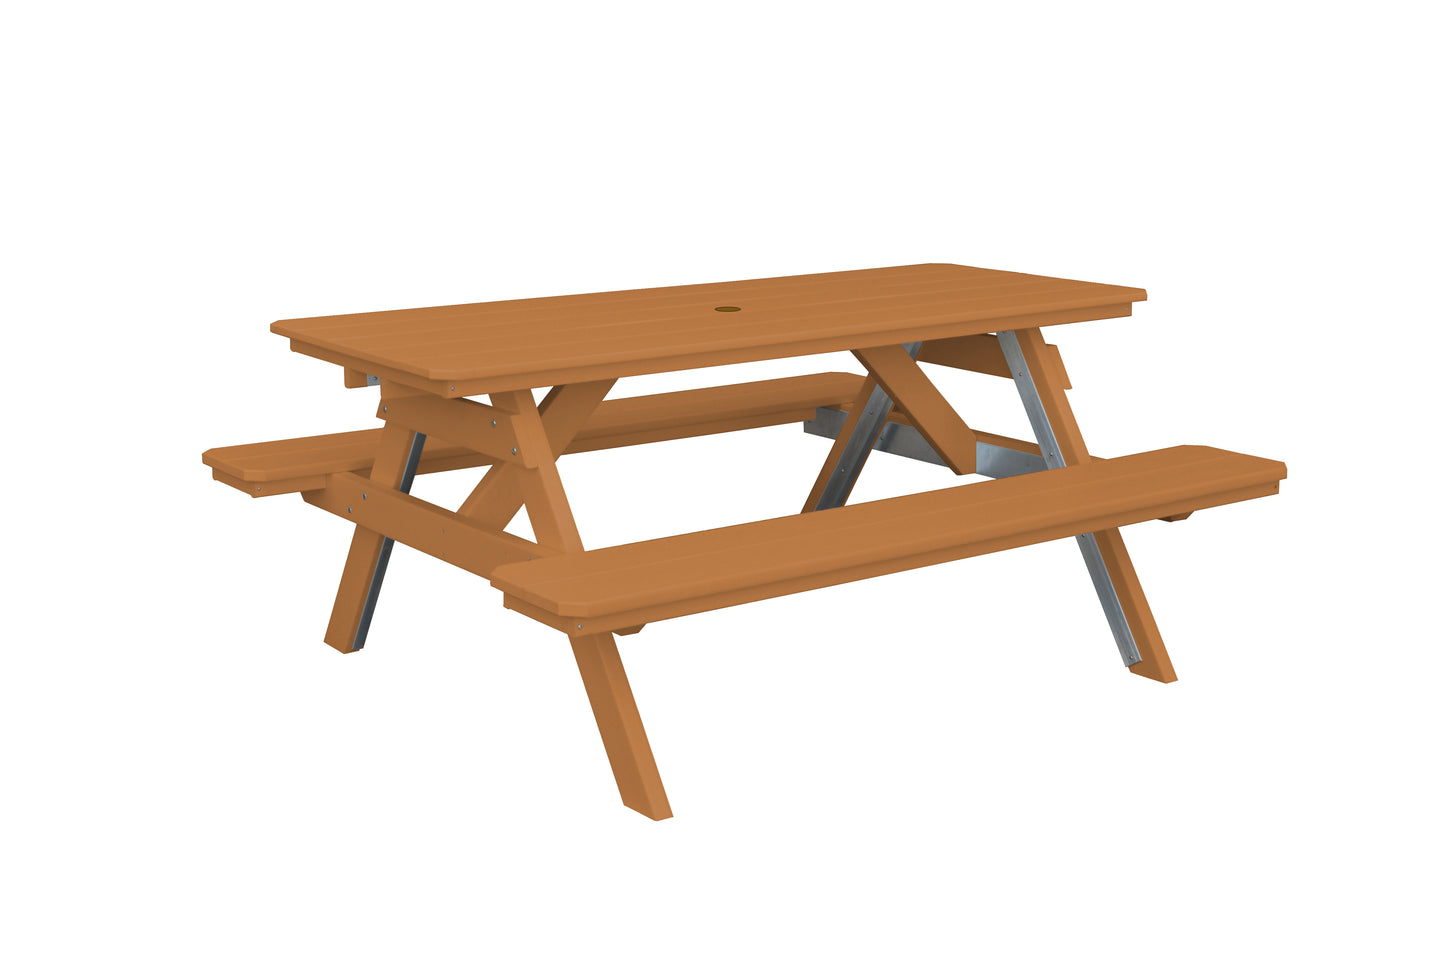 A&L Furniture Co. Recycled Plastic 6' Picnic Table  - LEAD TIME TO SHIP 10 BUSINESS DAYS